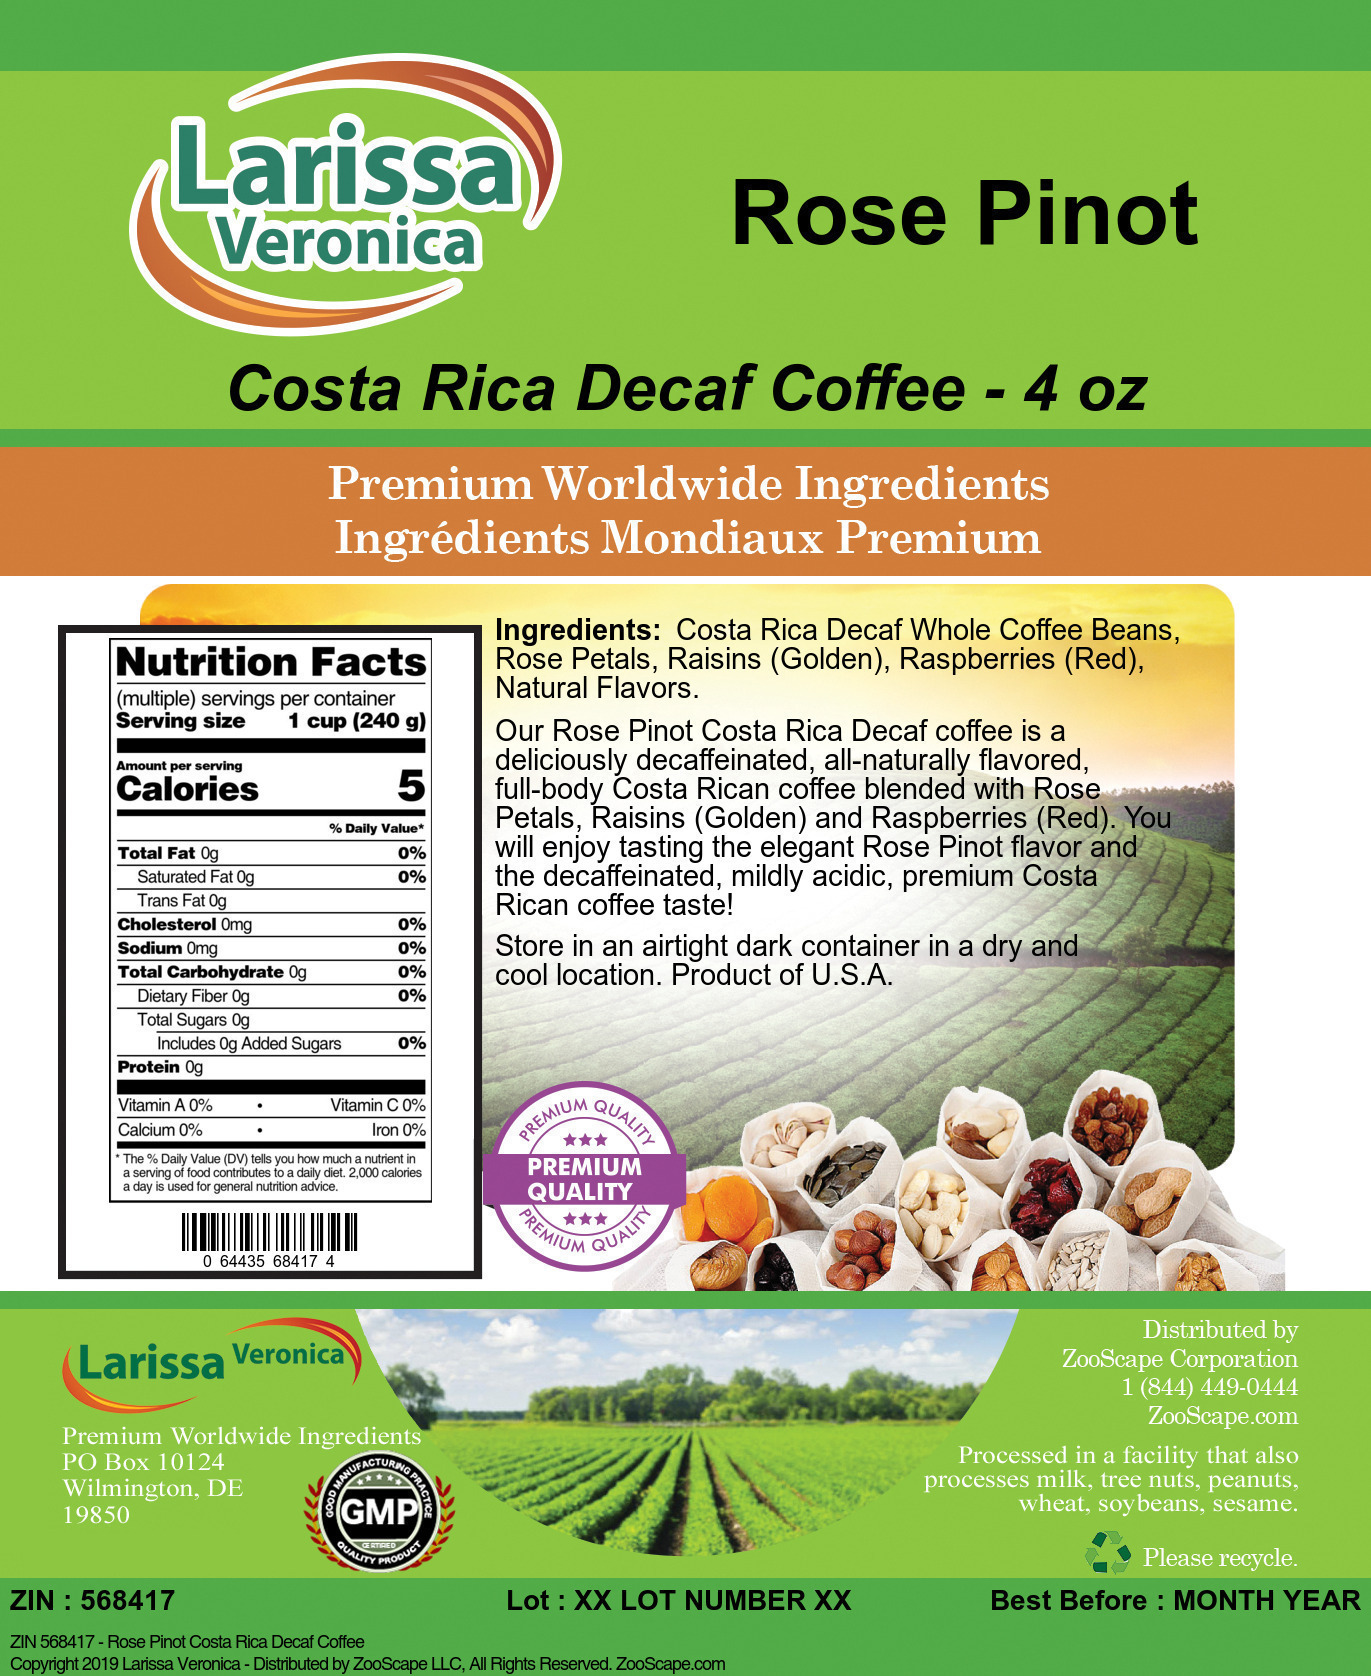 Rose Pinot Costa Rica Decaf Coffee - Label